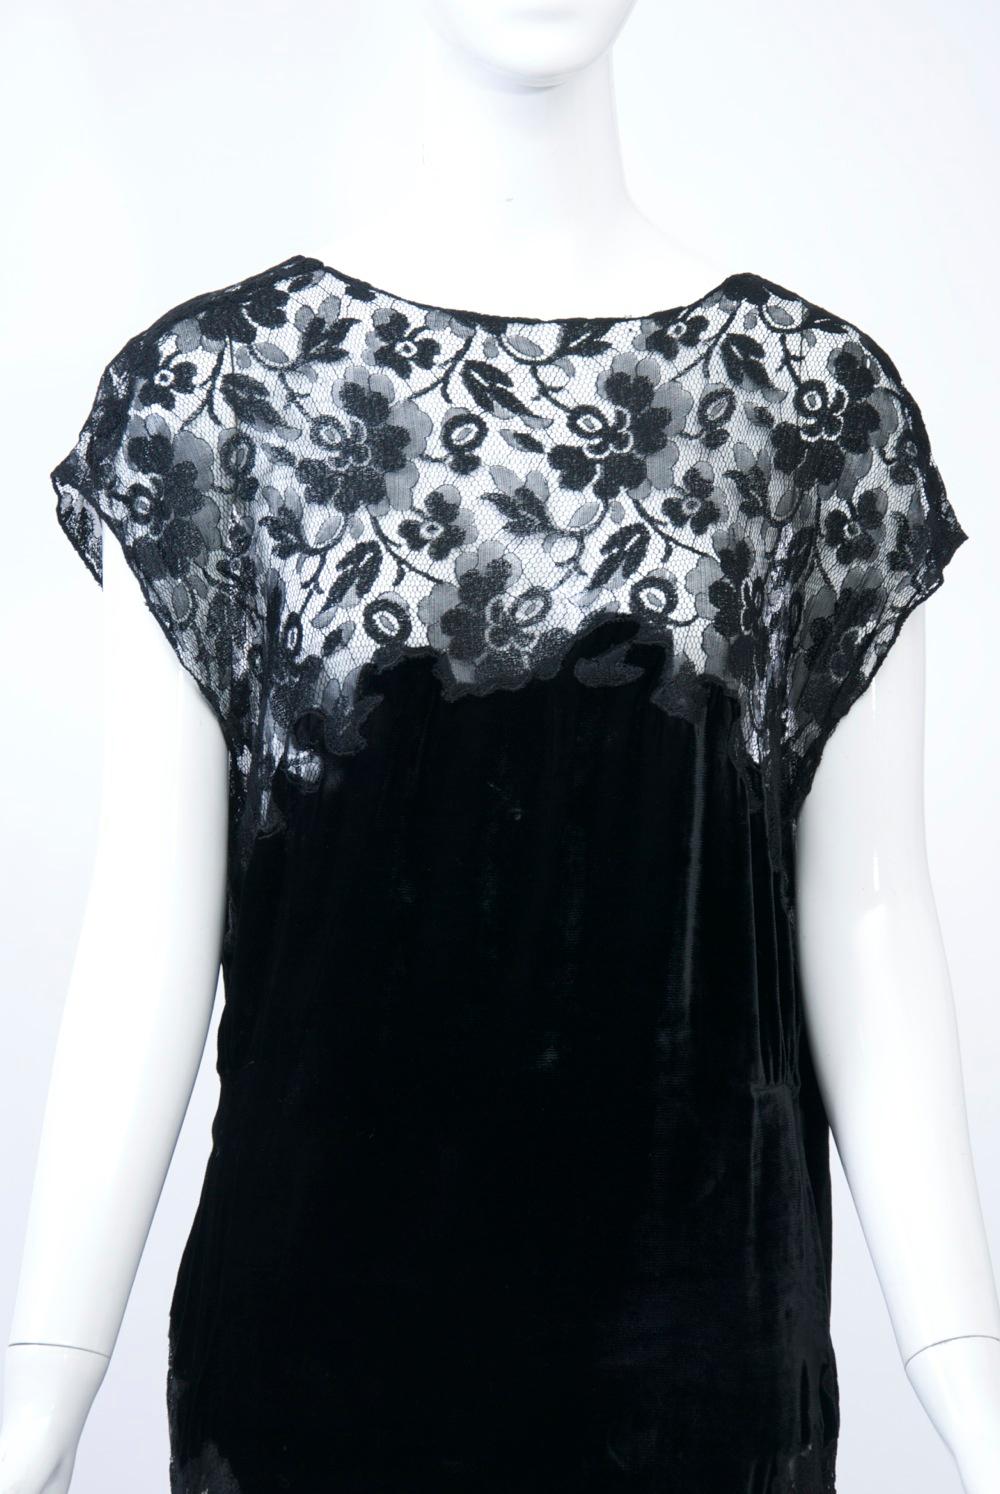 1930s black lace gown and bolero jacket, the long dress having an open neckline and cap sleeves and featuring a deep panel of black silk velvet extending from the bust through the hips and terminating in a V front and back. The graceful back is a